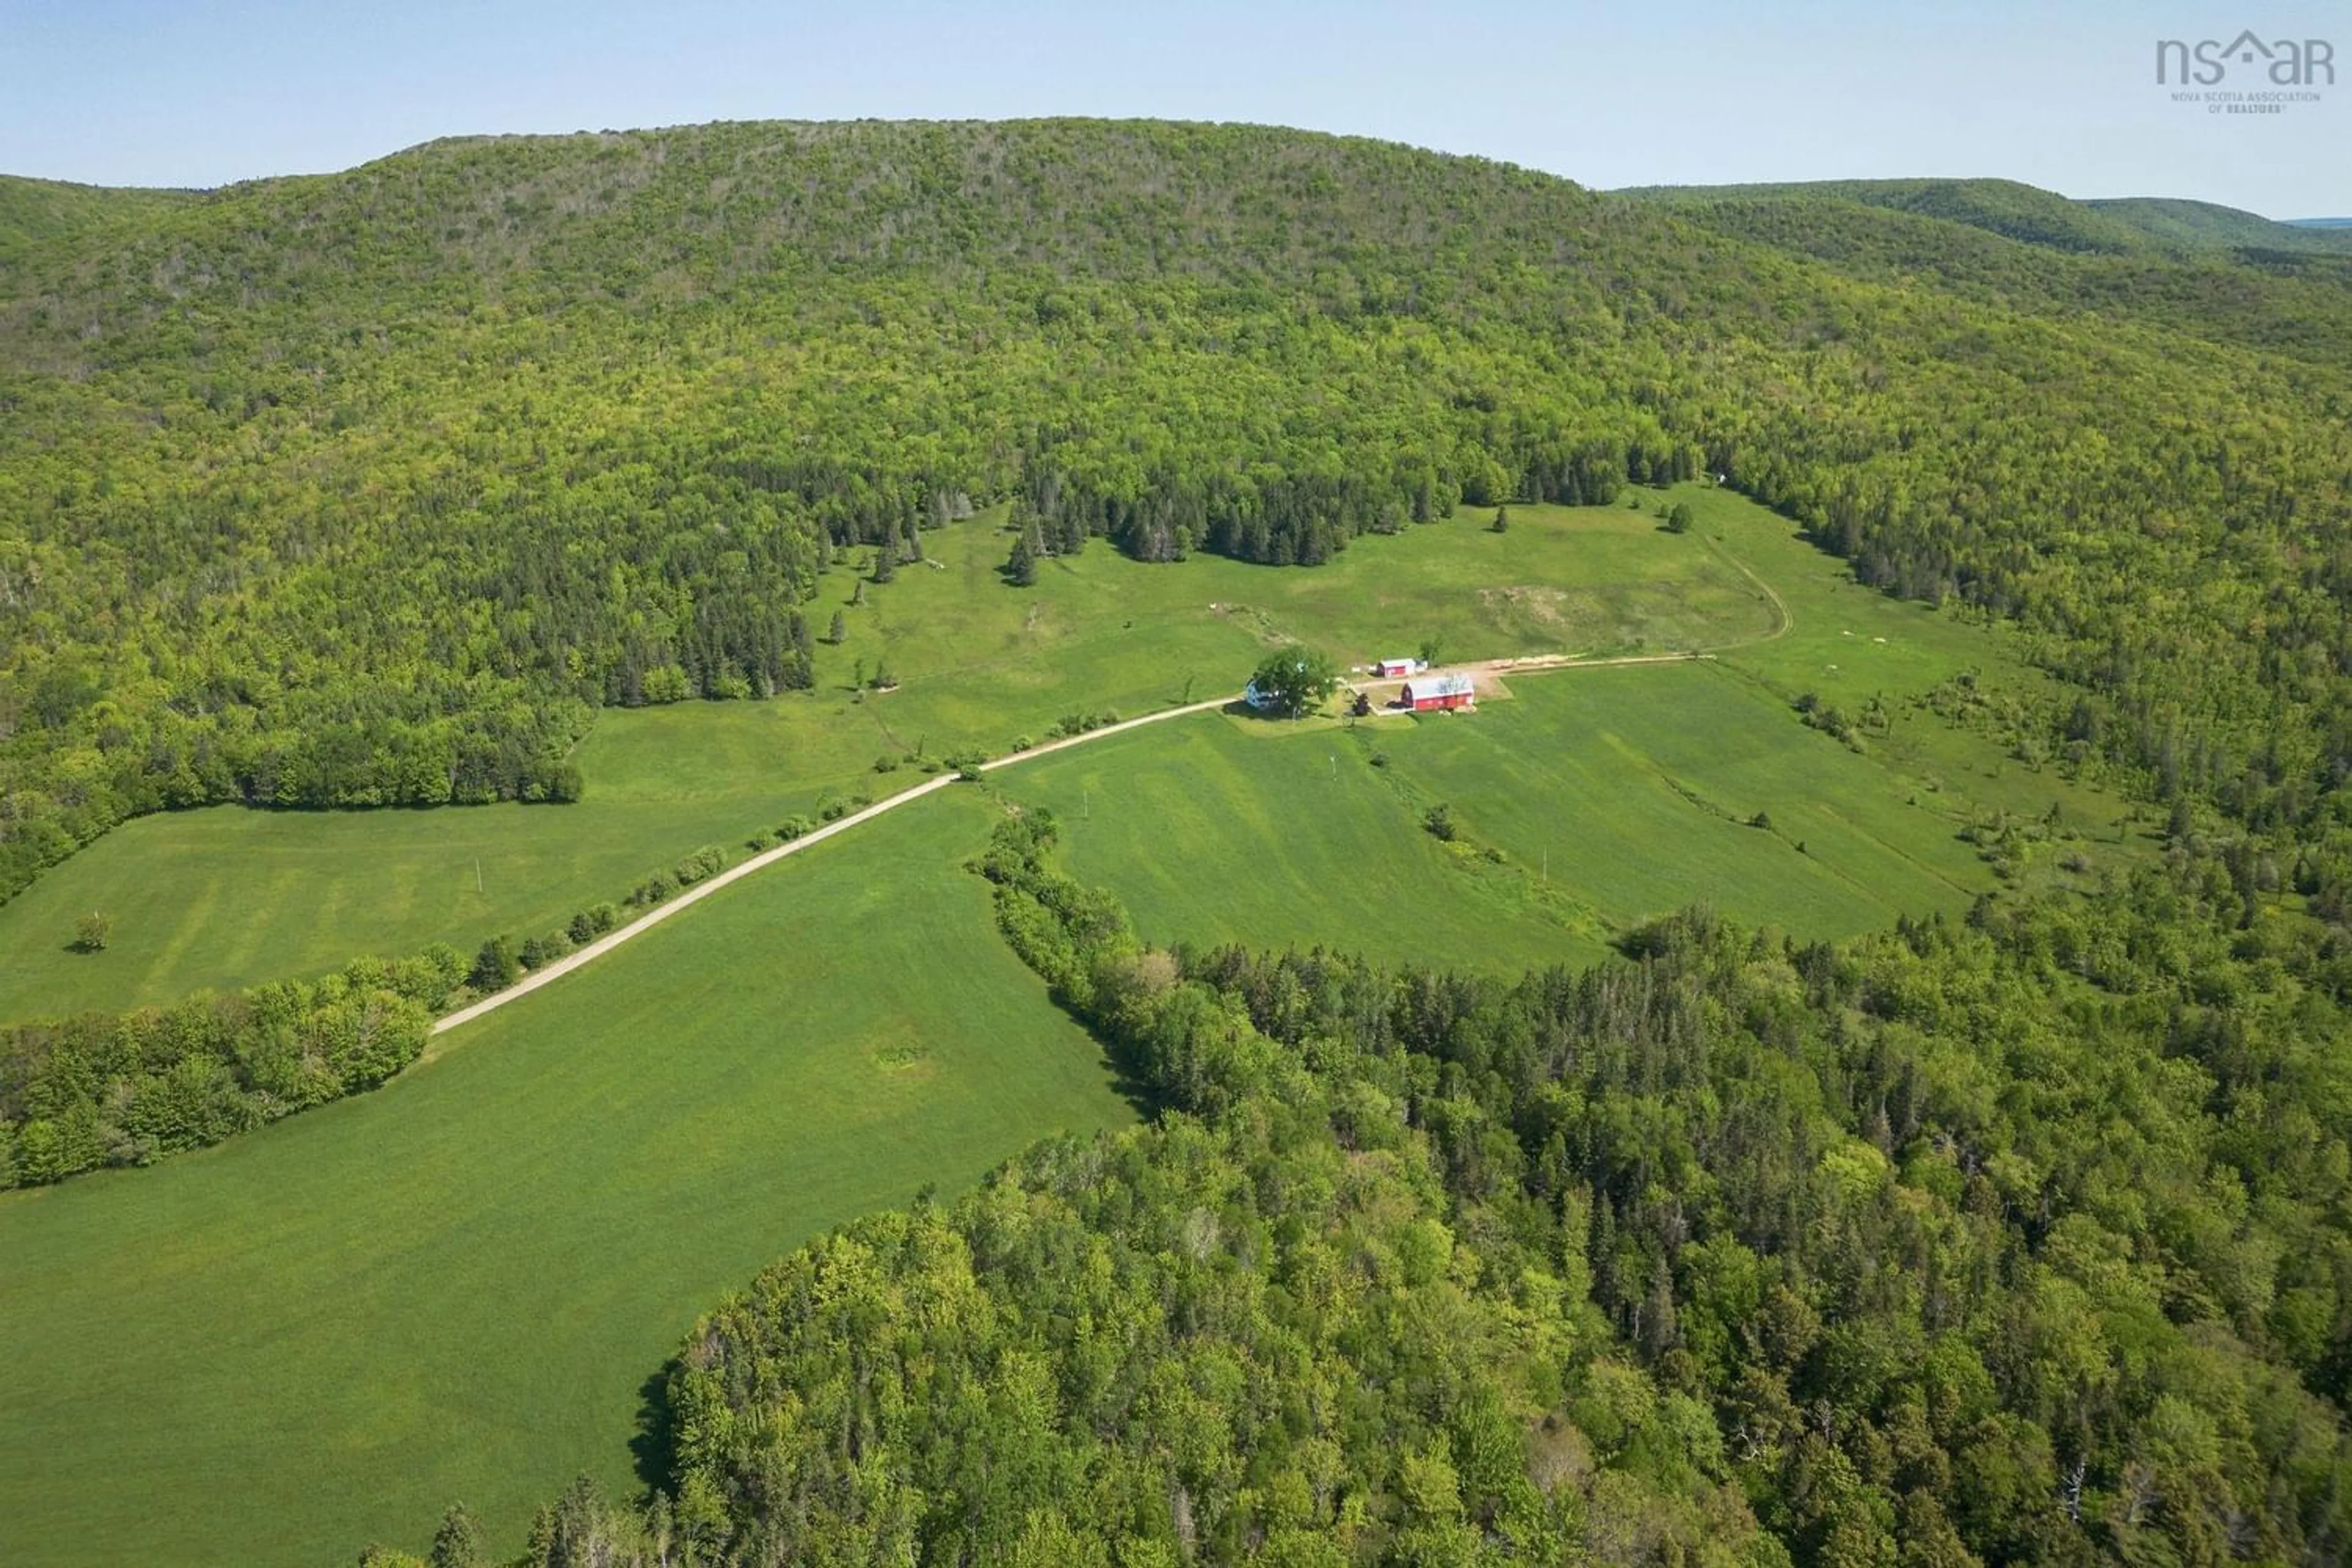 Forest view for 380 Northeast Mabou Rd, Mabou Nova Scotia B0E 1X0